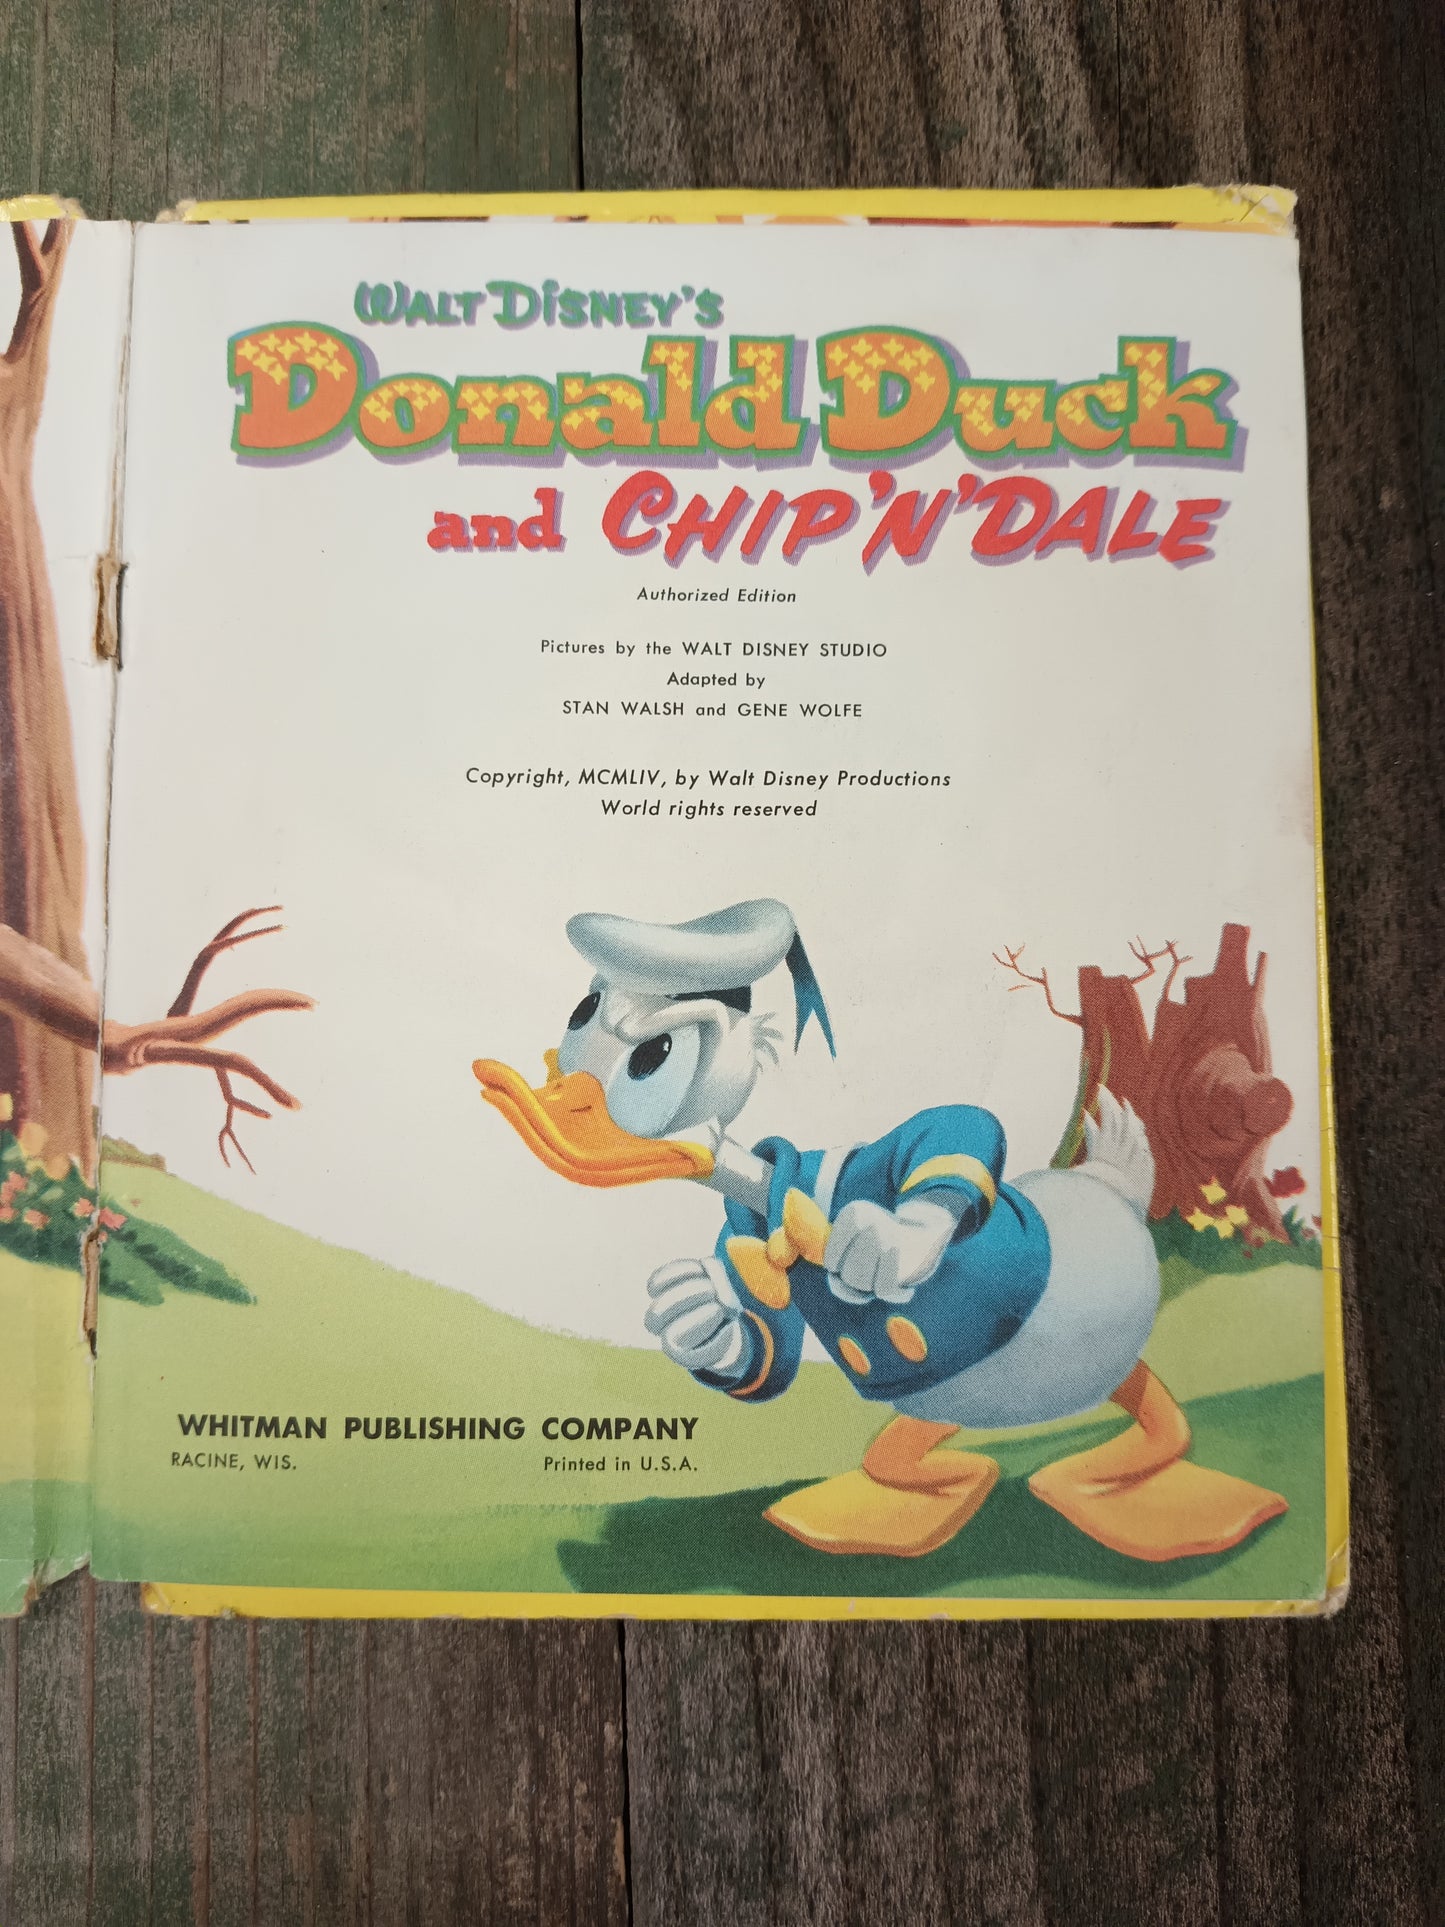 Donald Duck and Chip 'n' Dale